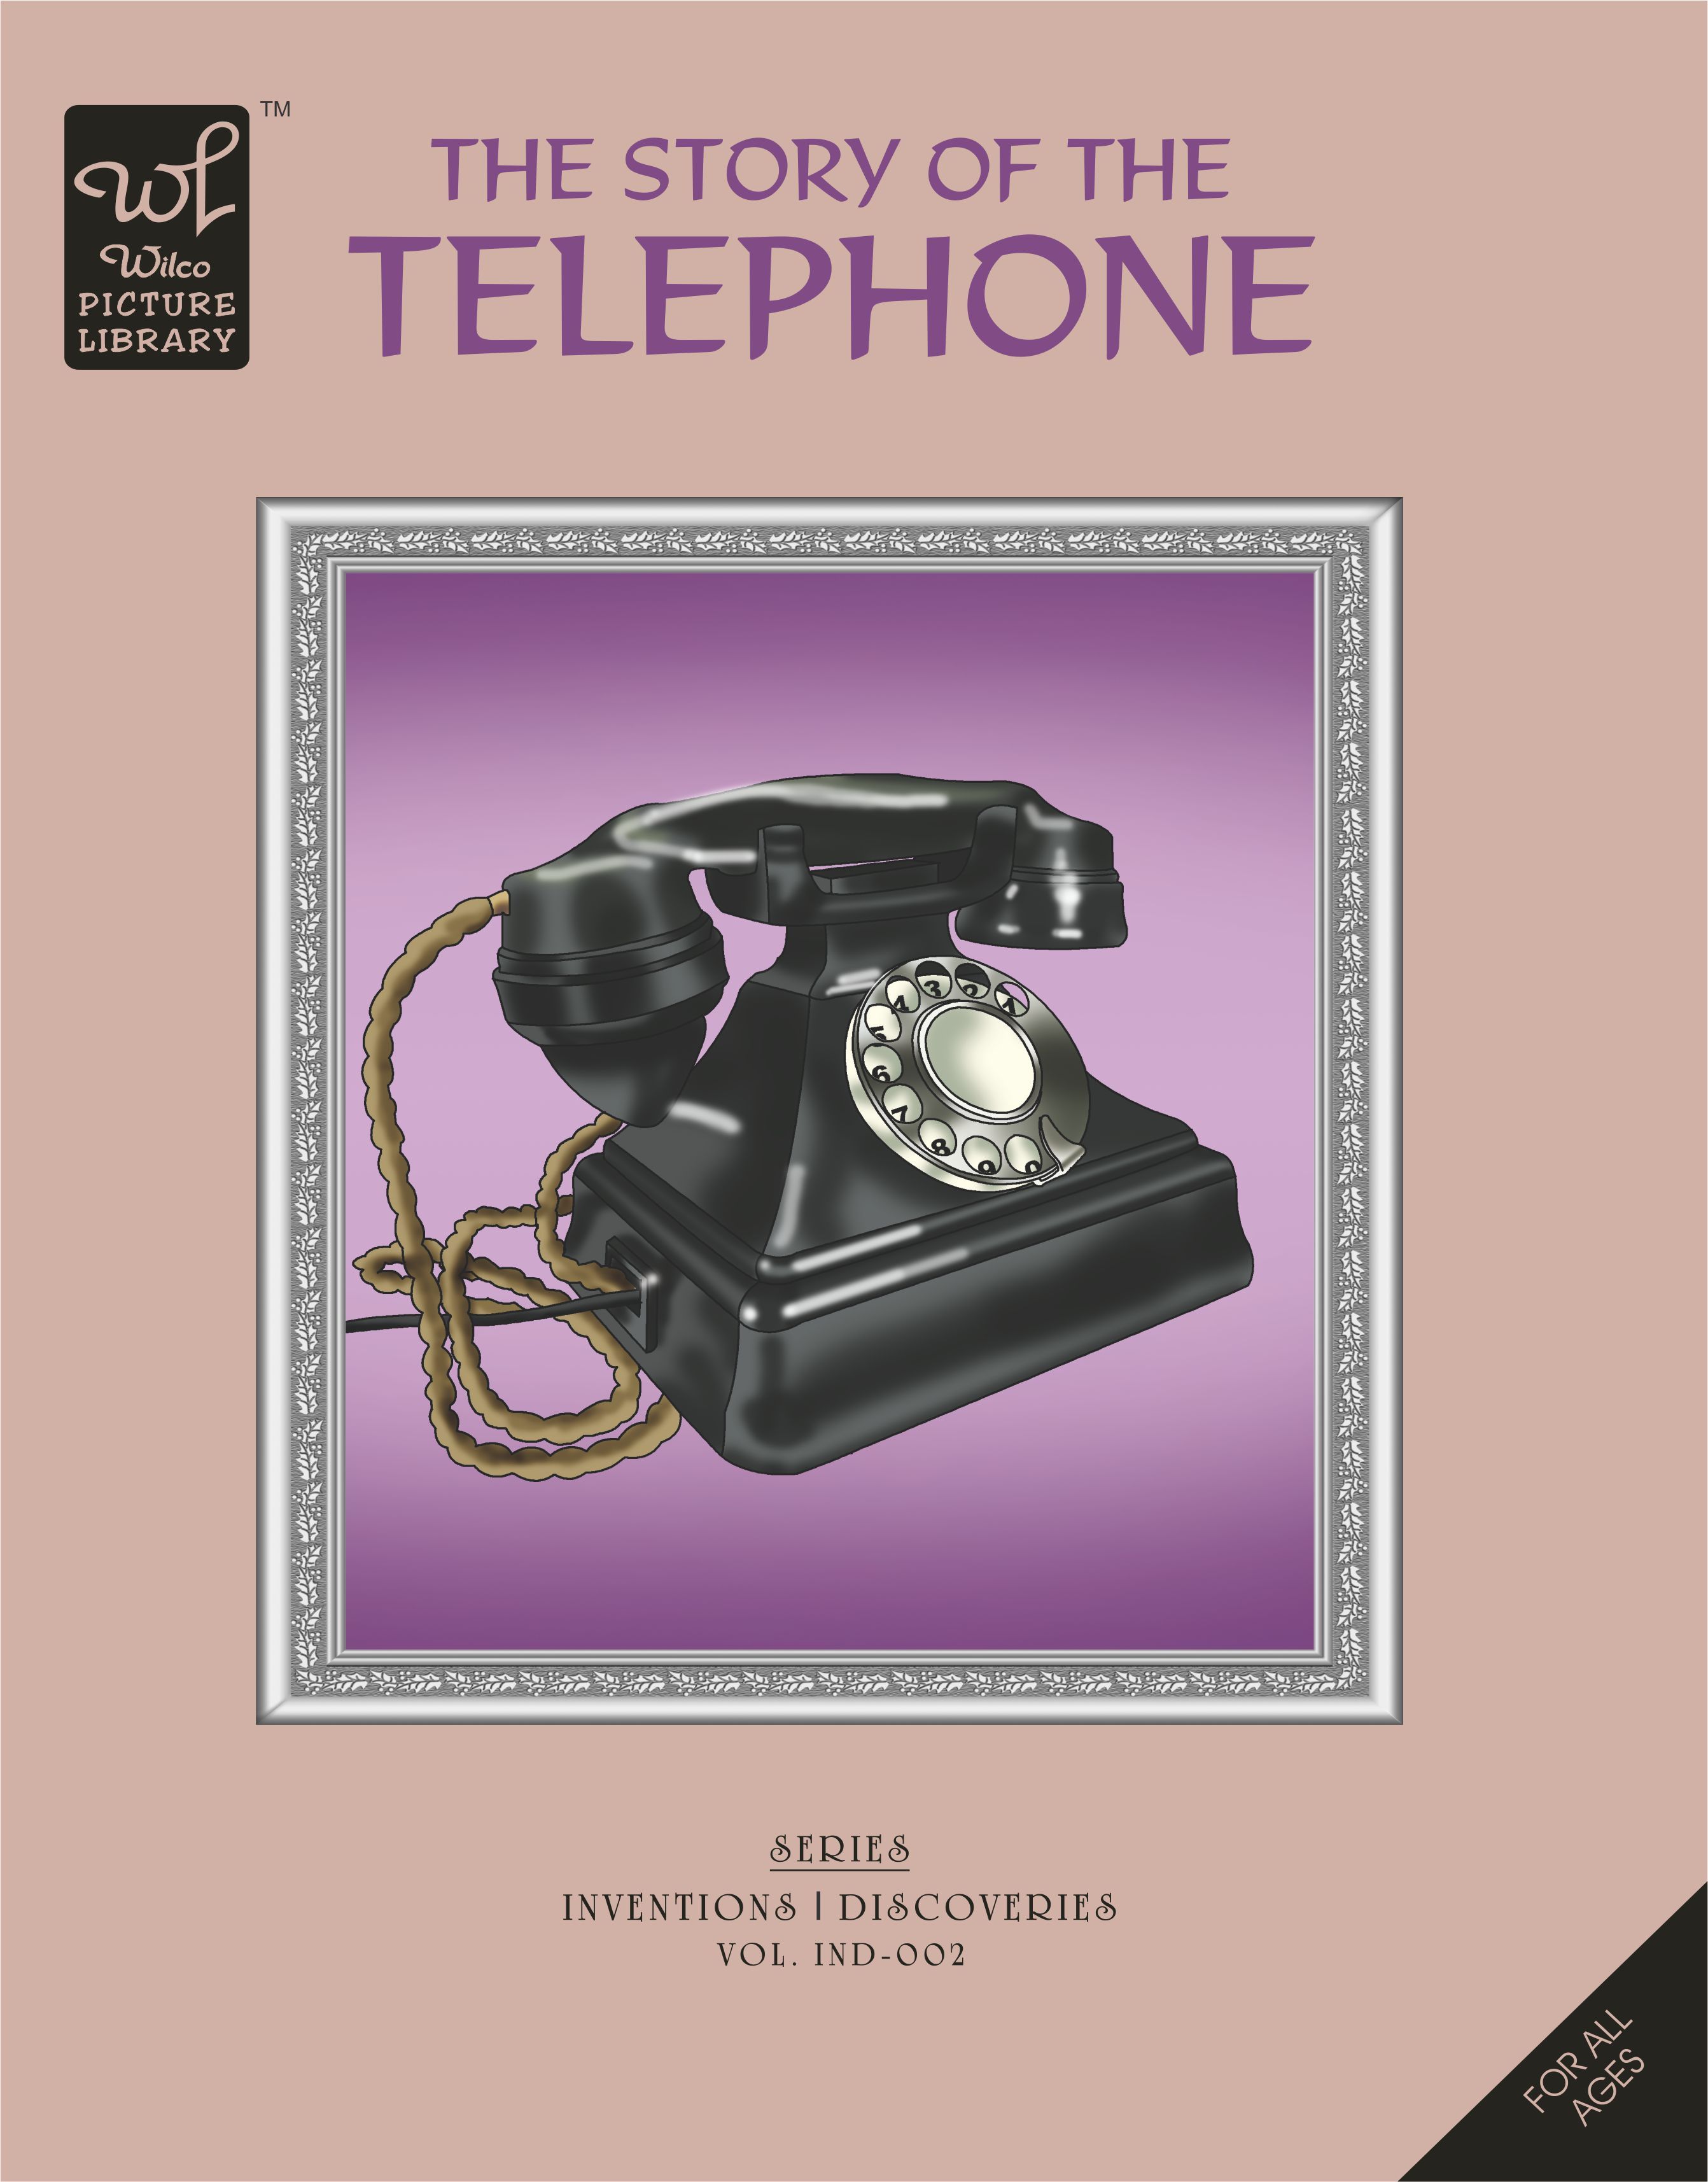 WPL:The Story of the Telephone